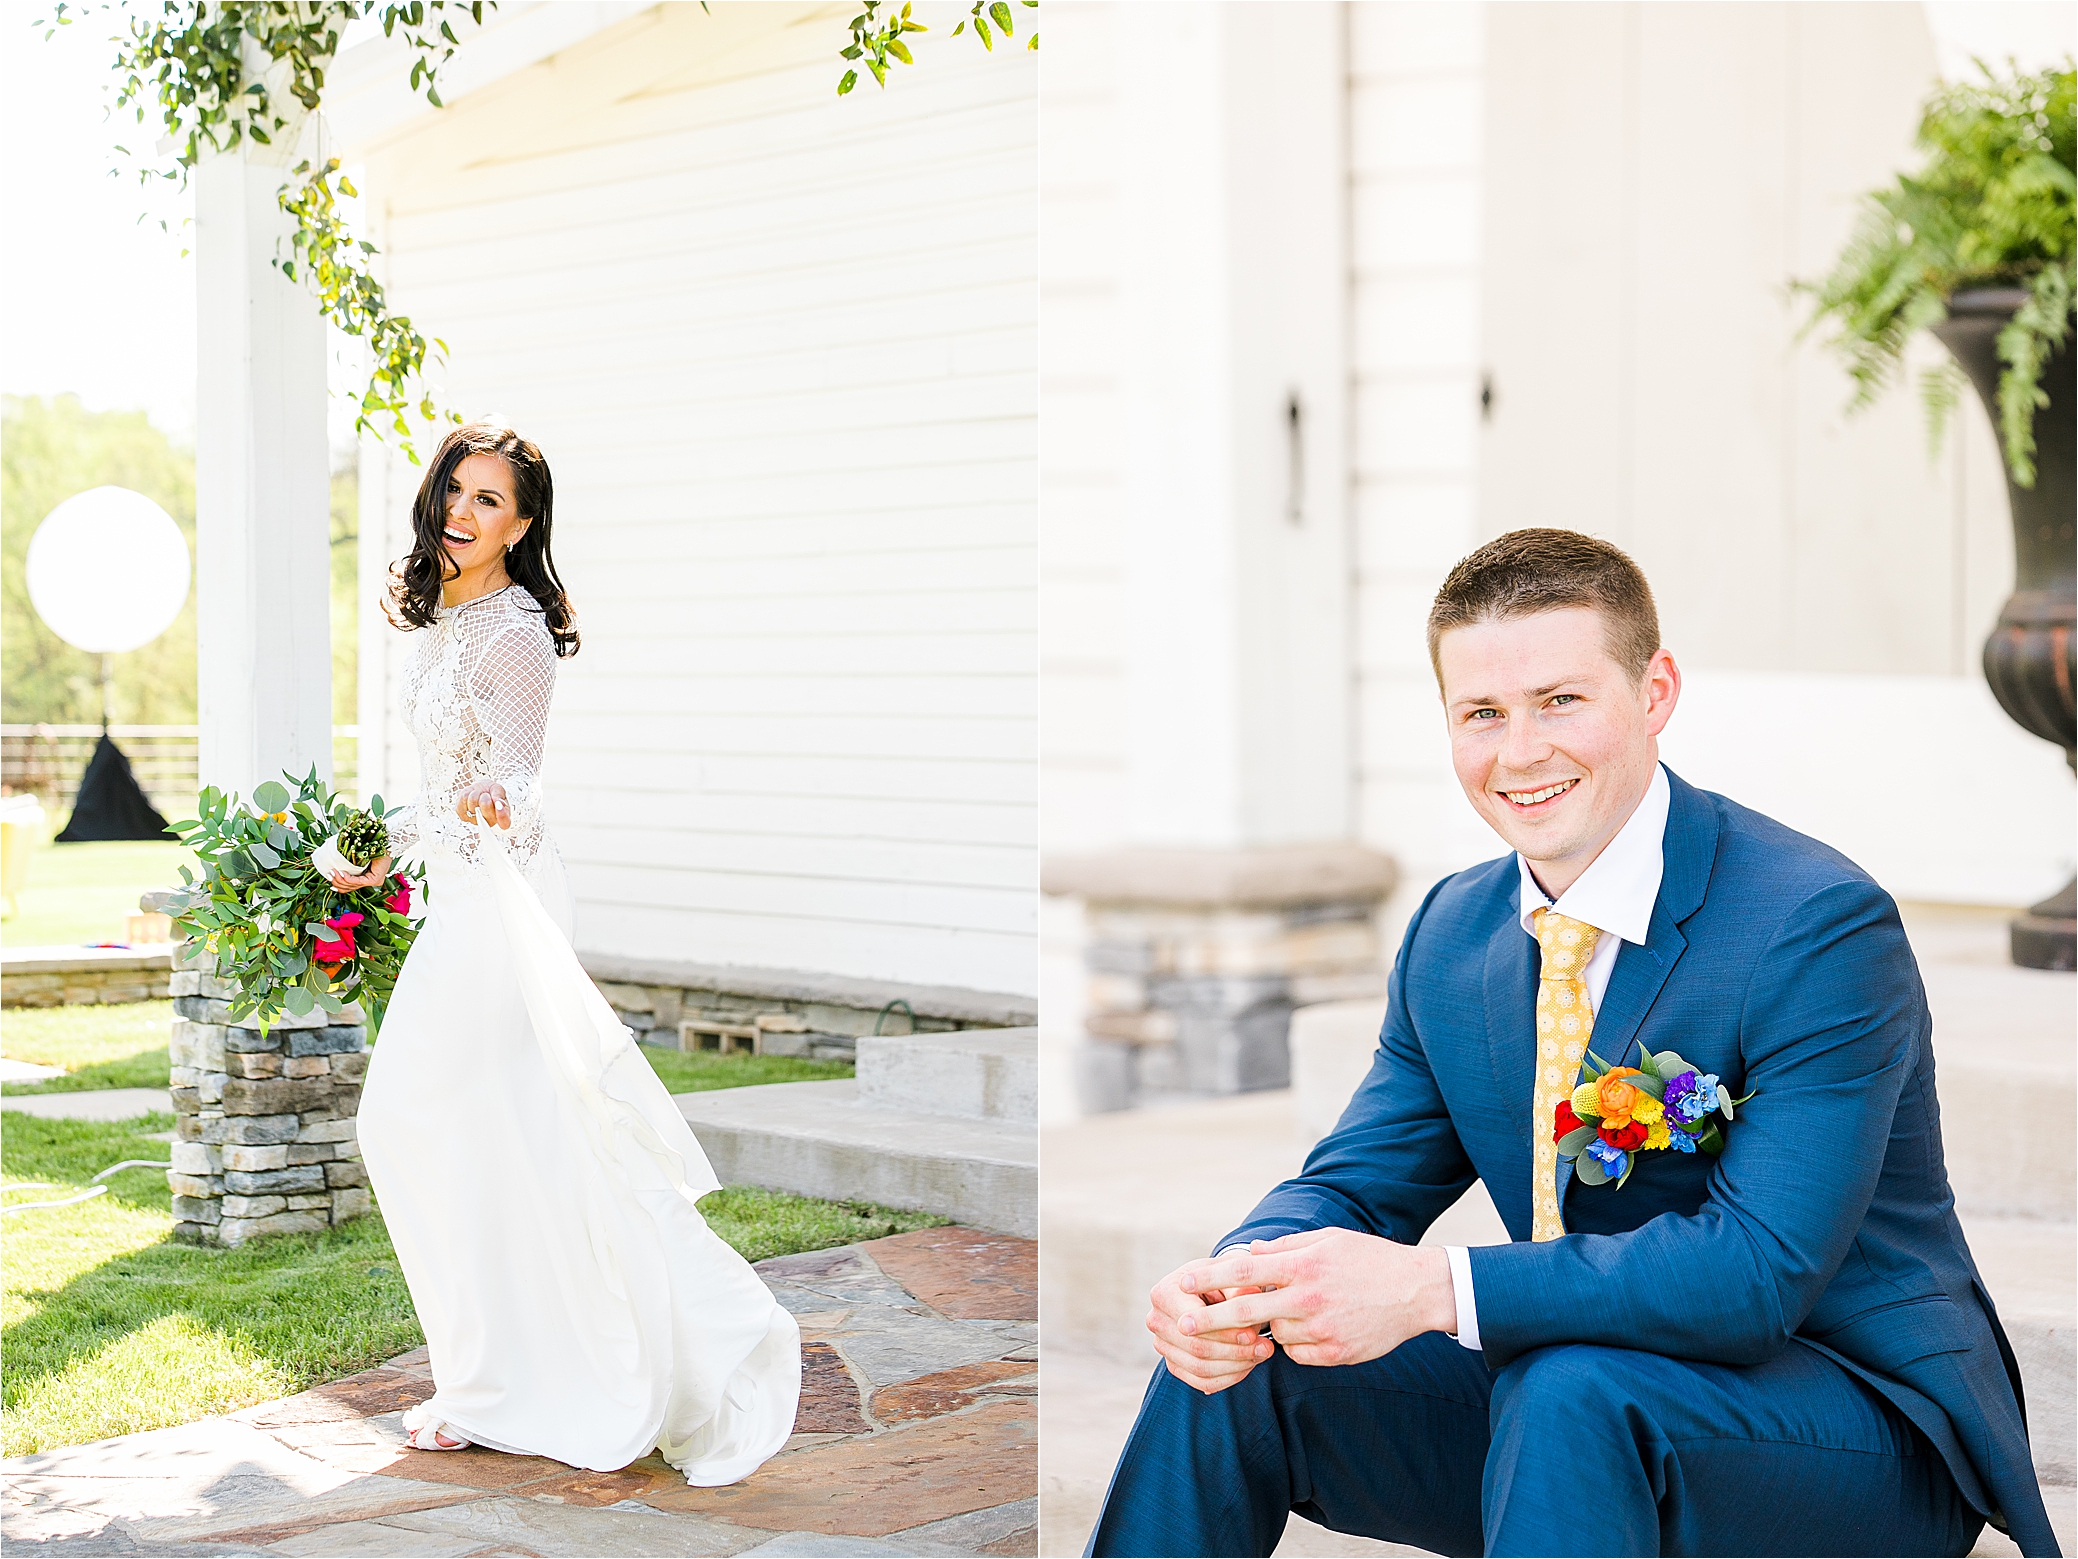 Separate portraits before the ceremony of the bride and groom on their wedding day at Pineway Farms in Gladewater, Texas 